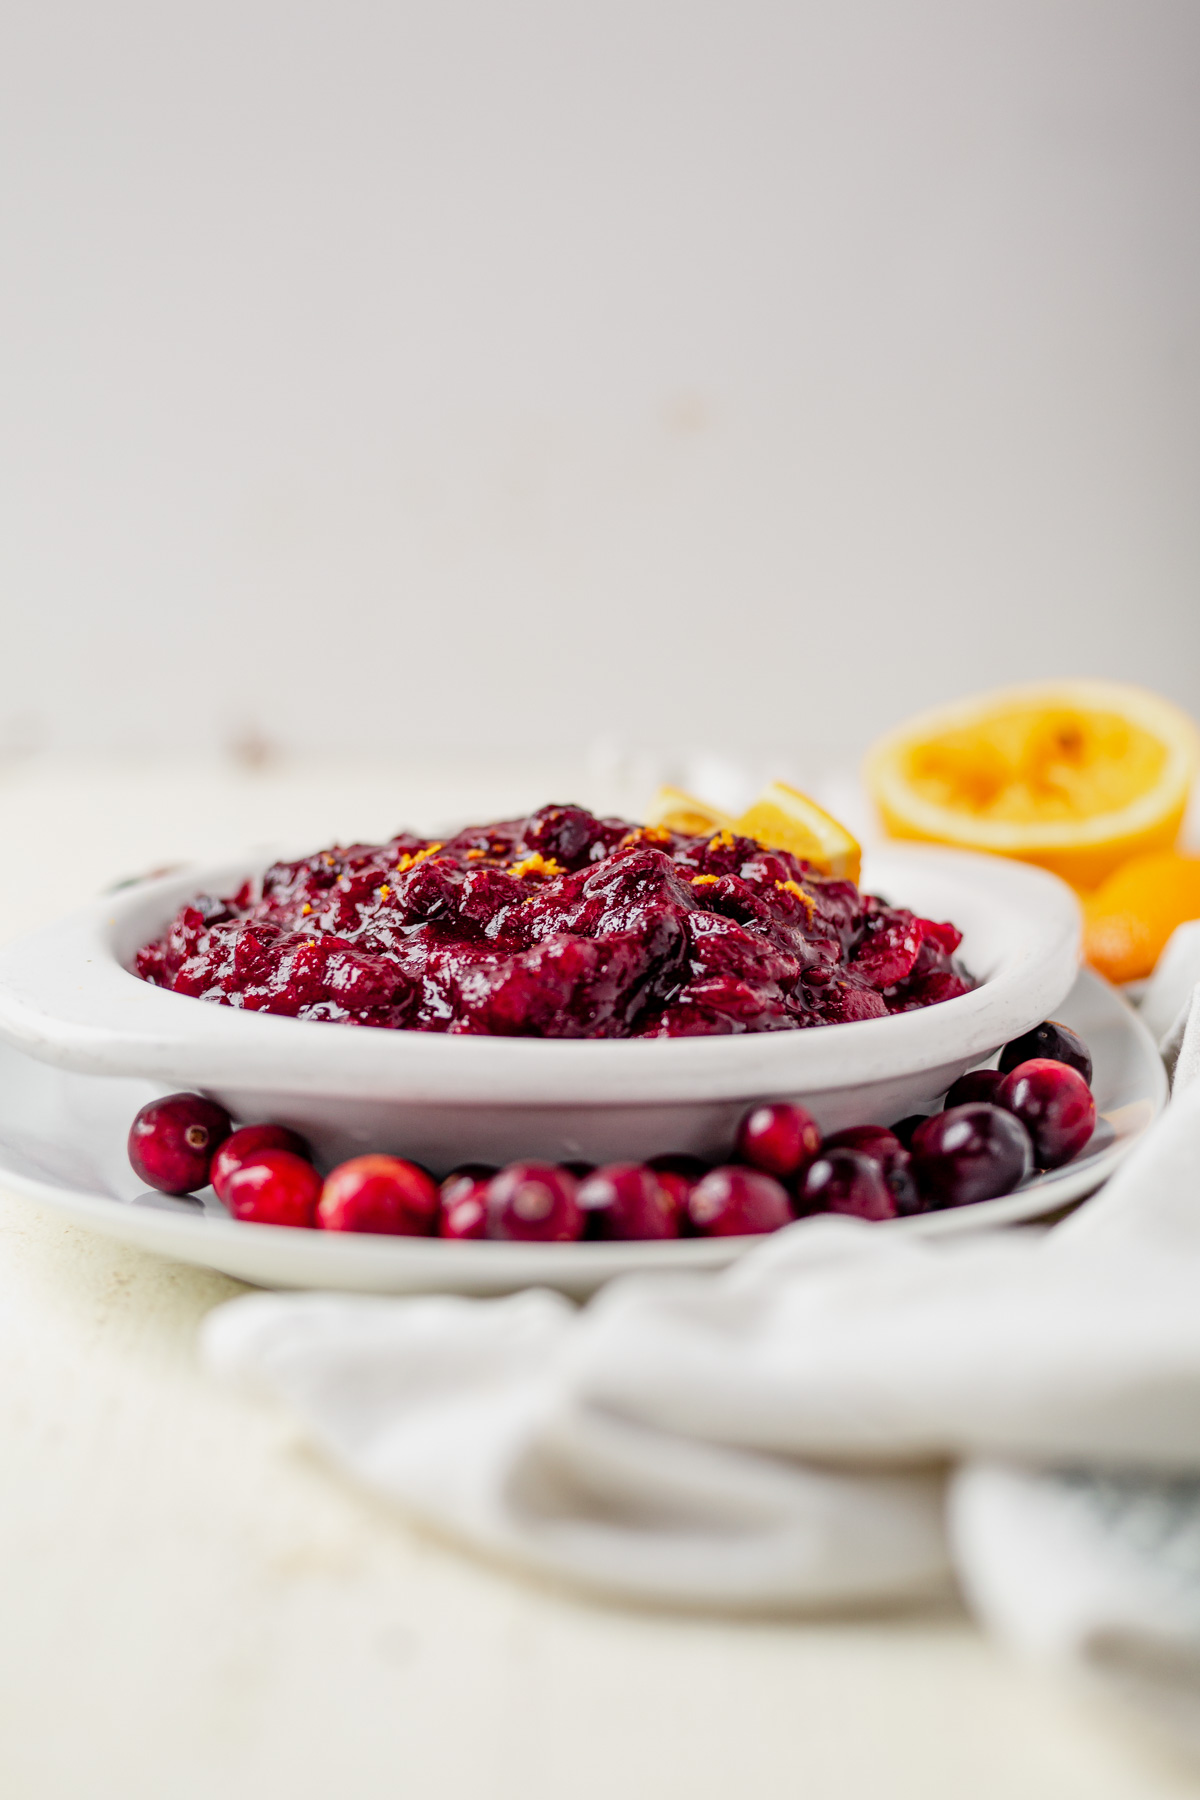 fresh cranberries and oranges surrounding a bowl of healthy cranberry sauce